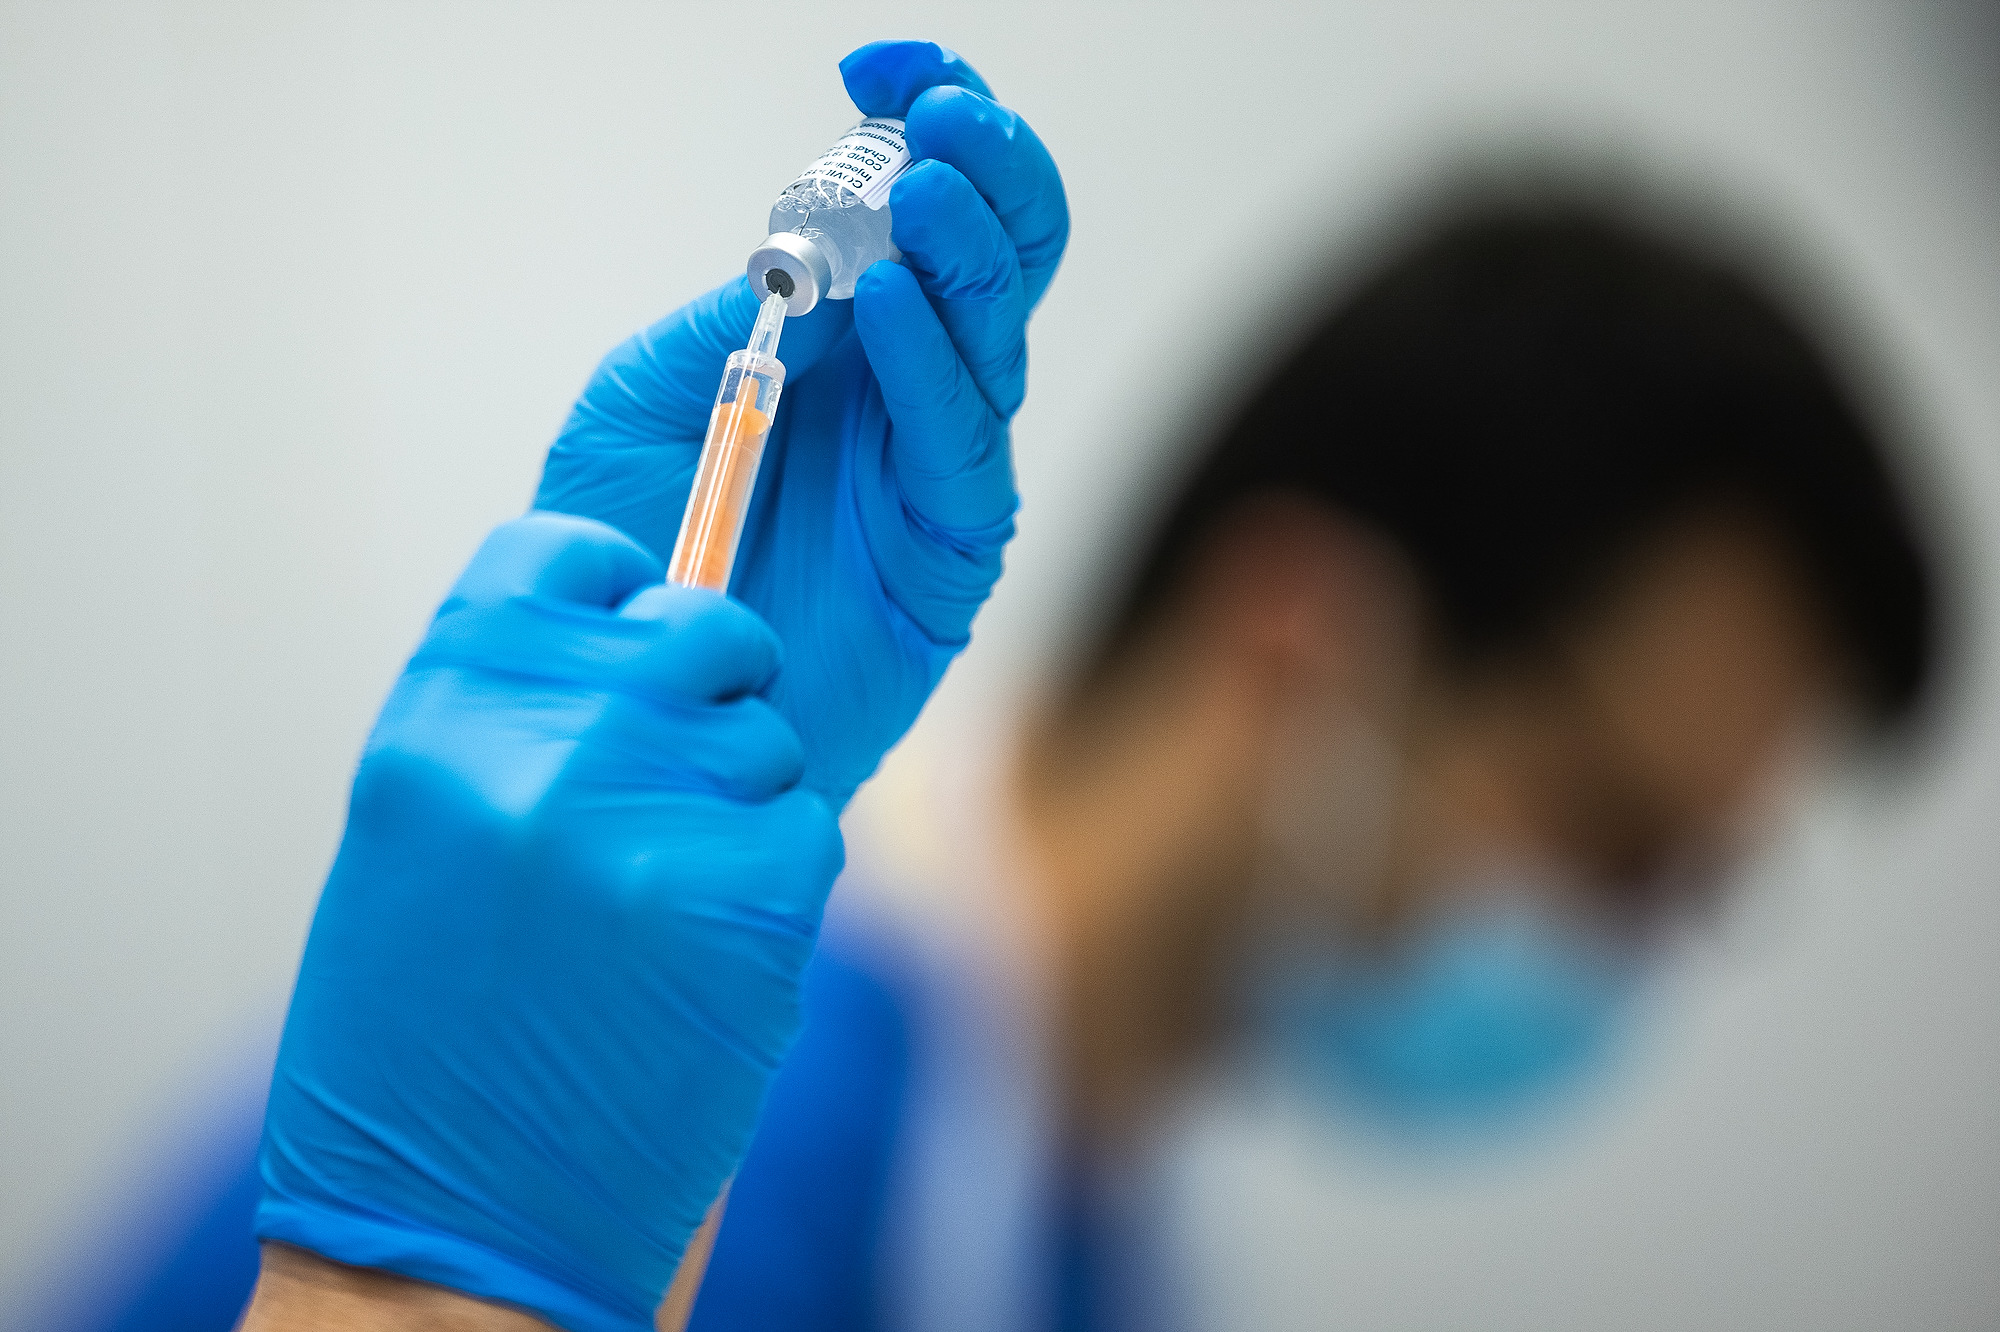 A pair of hands in blue gloves drawing up a vaccine in to a needle, with a blurred, masked person in scrubs in the background.